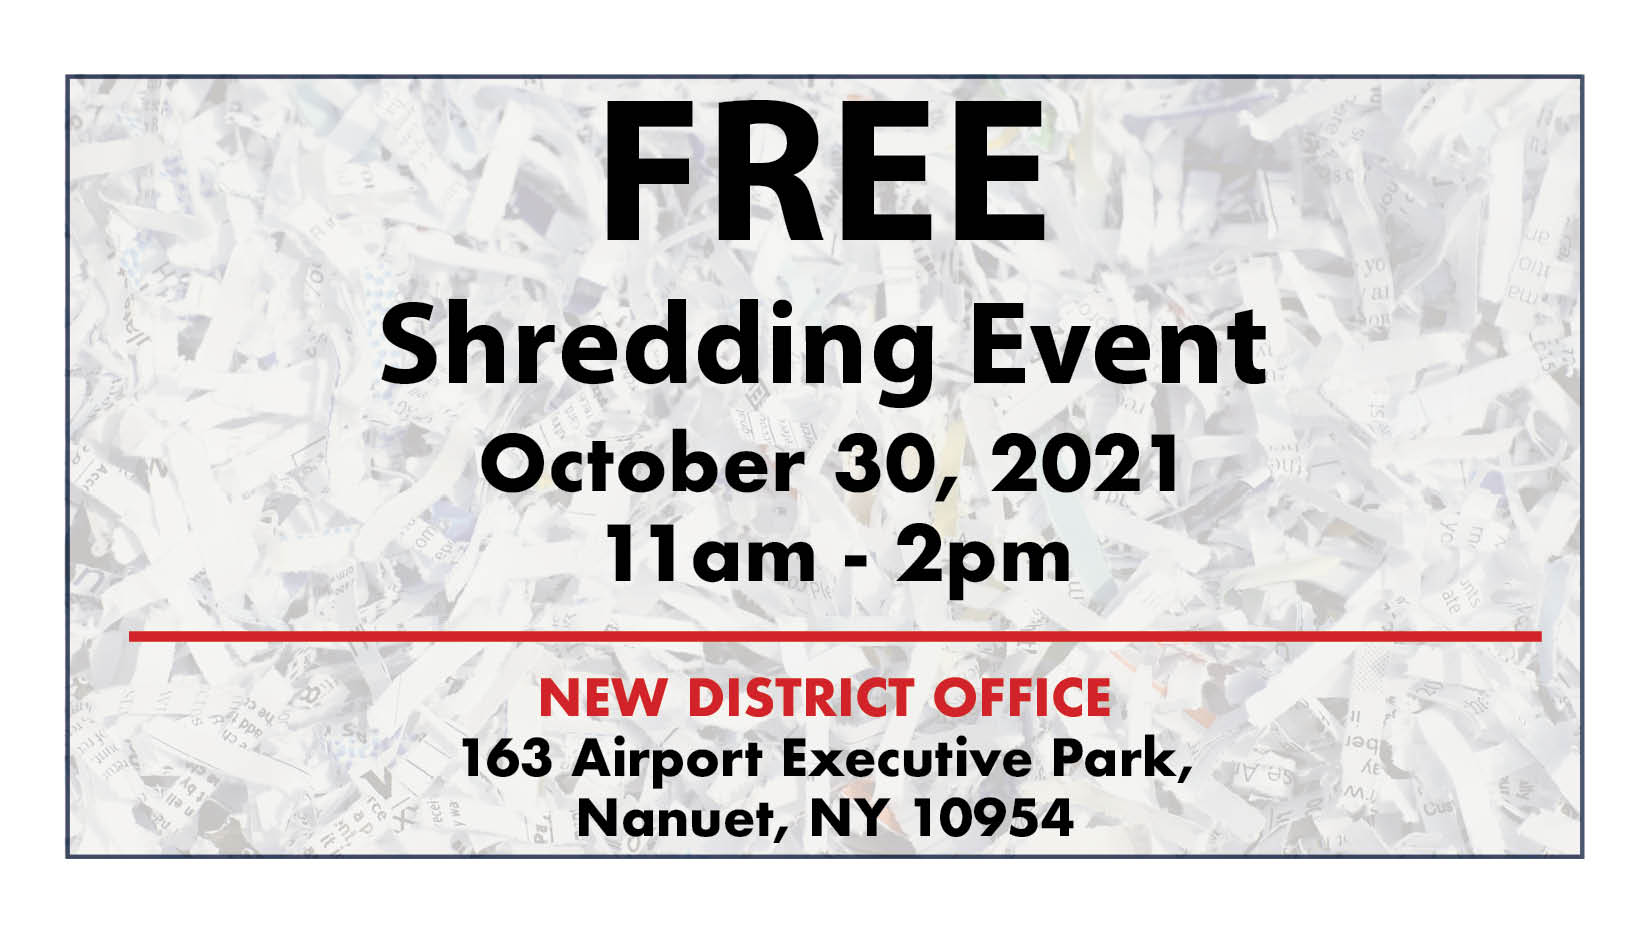 phone number to shred nation in hillside ny